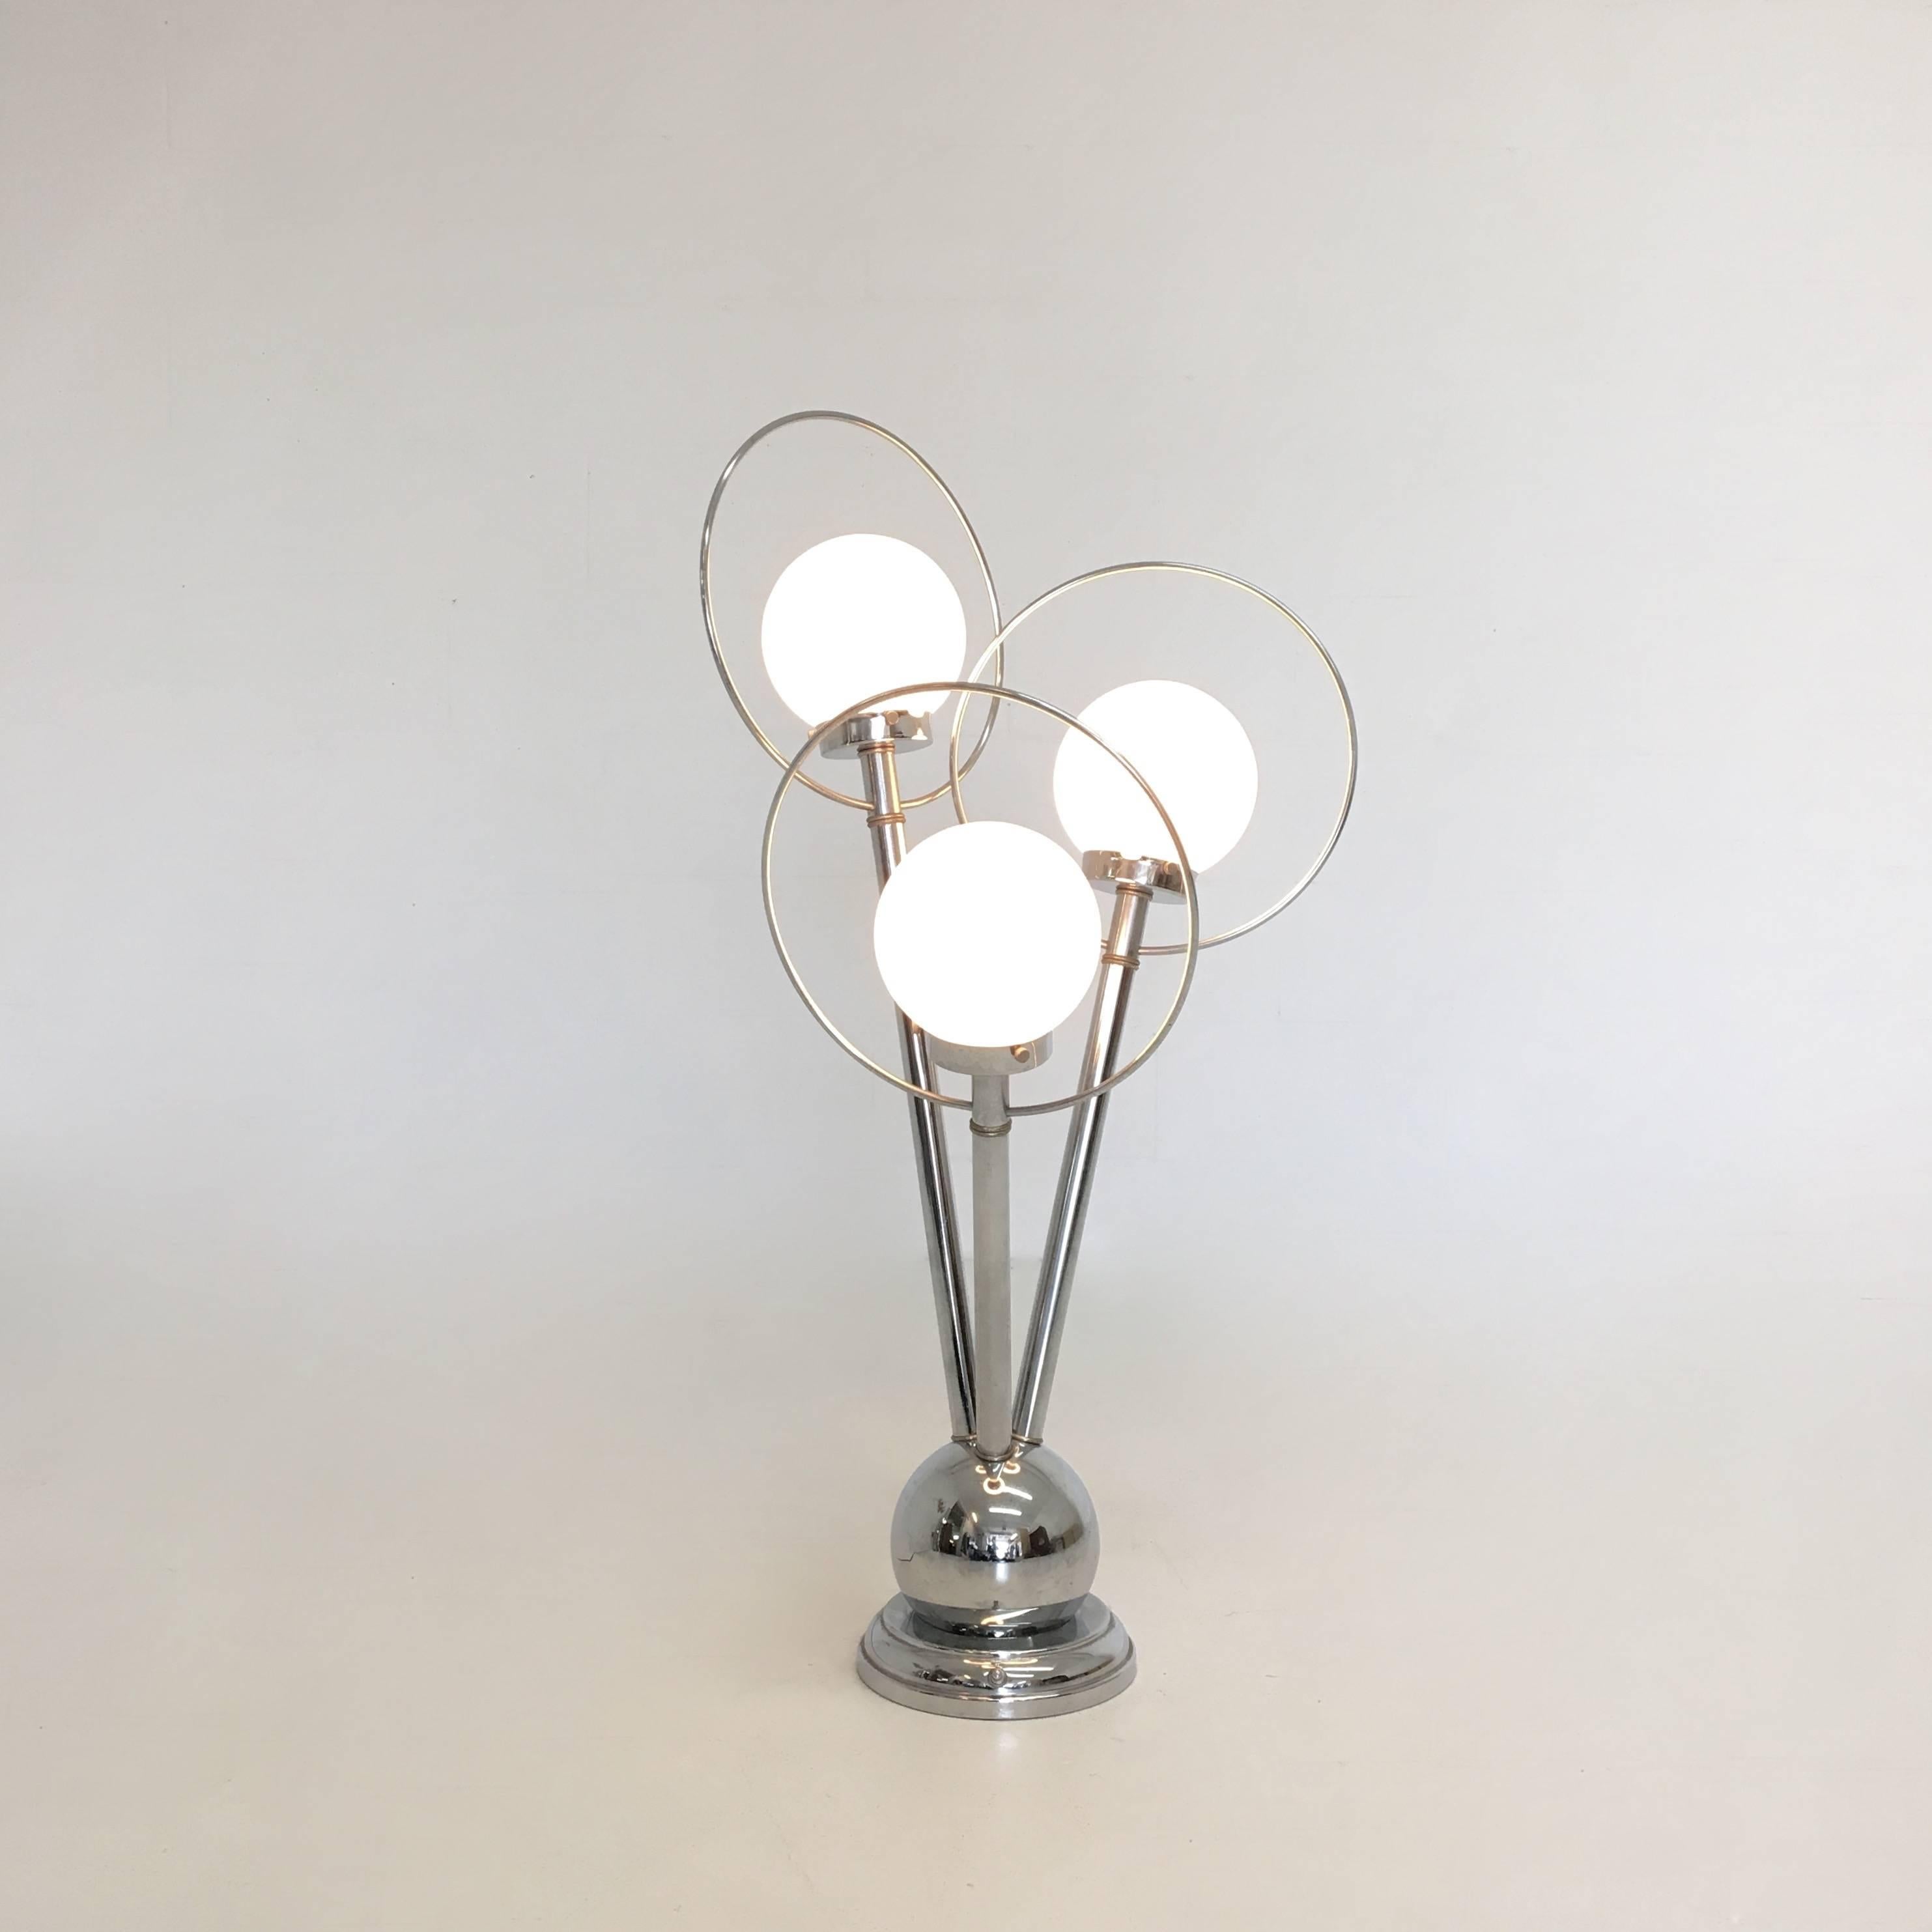 Sonneman three-bulbed table lamp in chrome and glass. Option of one, two or three bulbs on. Some age appropriate wear.
8